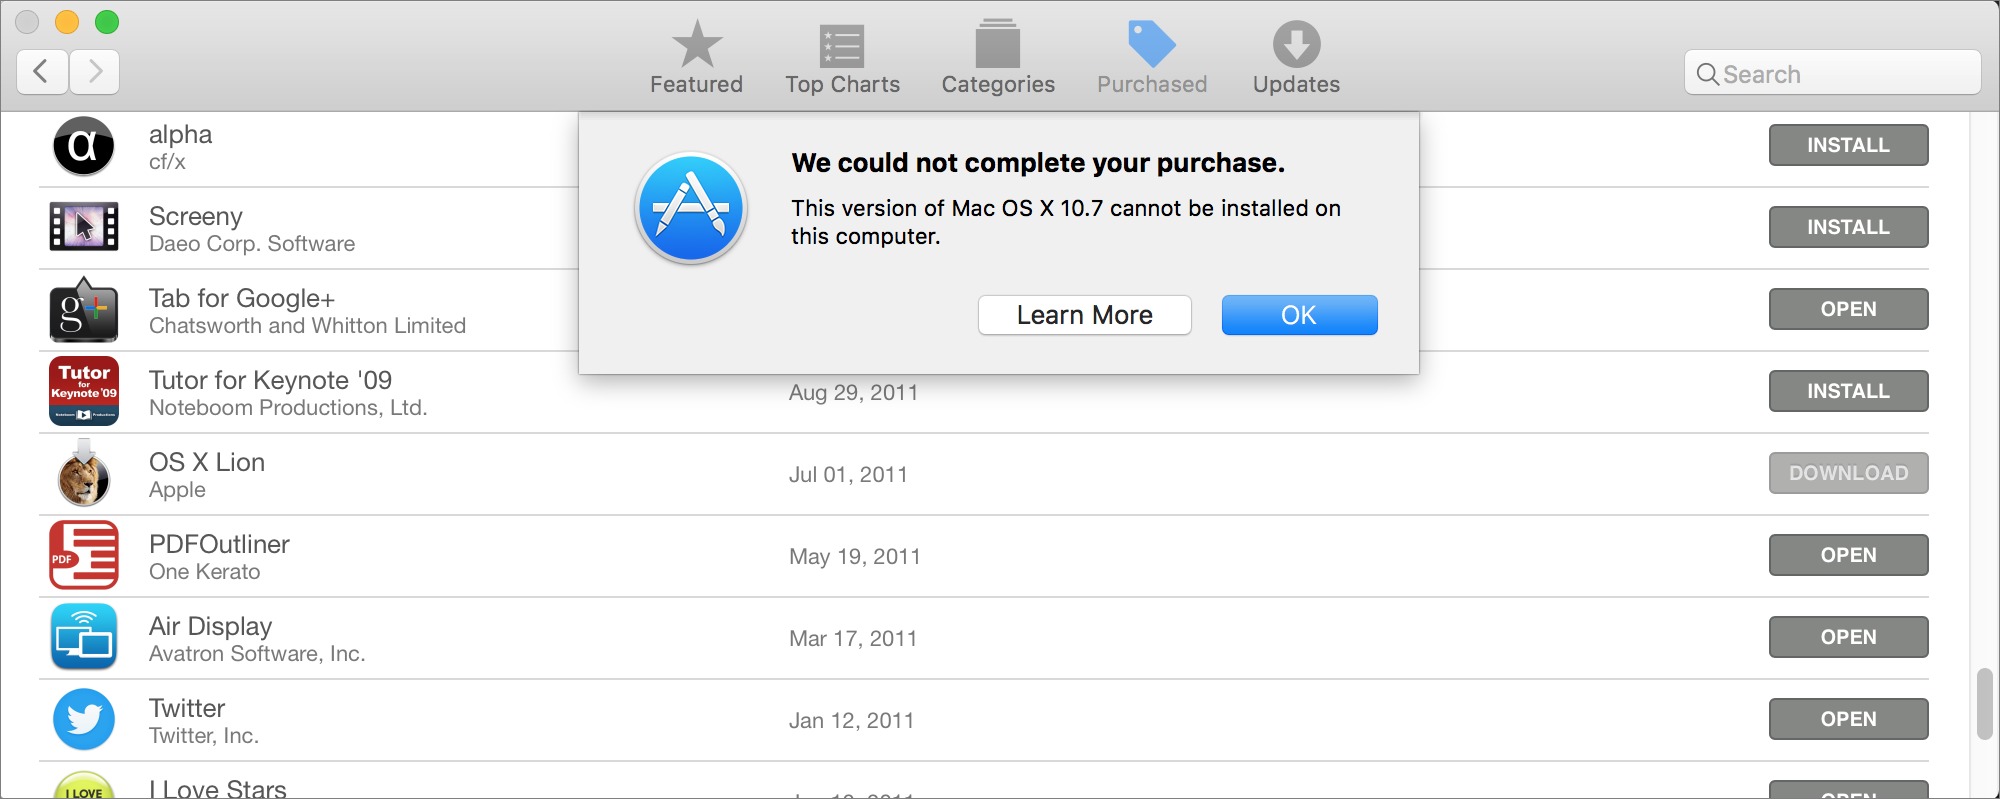 Mac downloading apps for previous os x version history